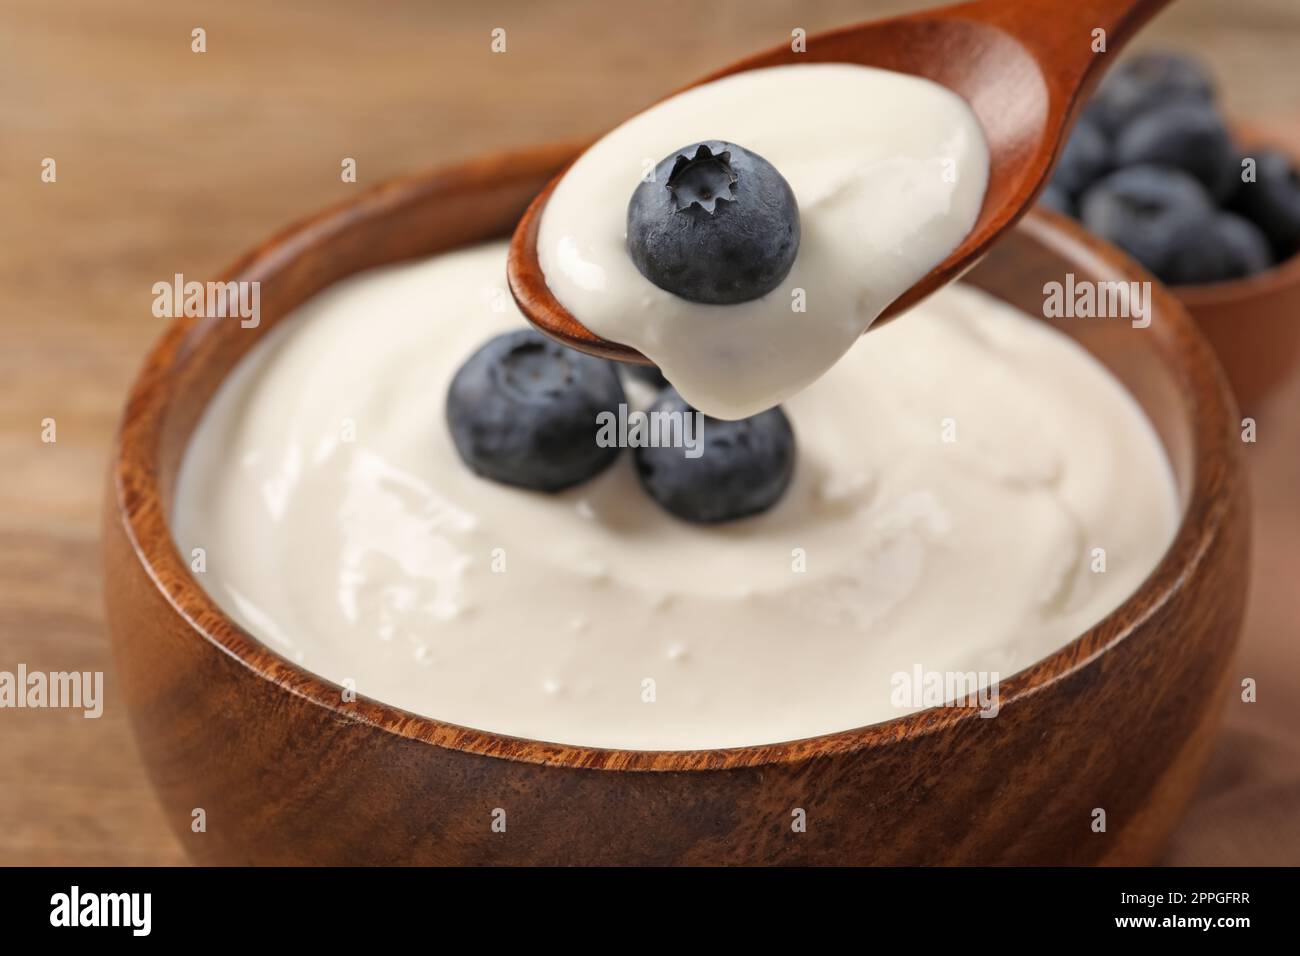 Eating tasty yogurt with blueberries from bowl on wooden table, closeup Stock Photo